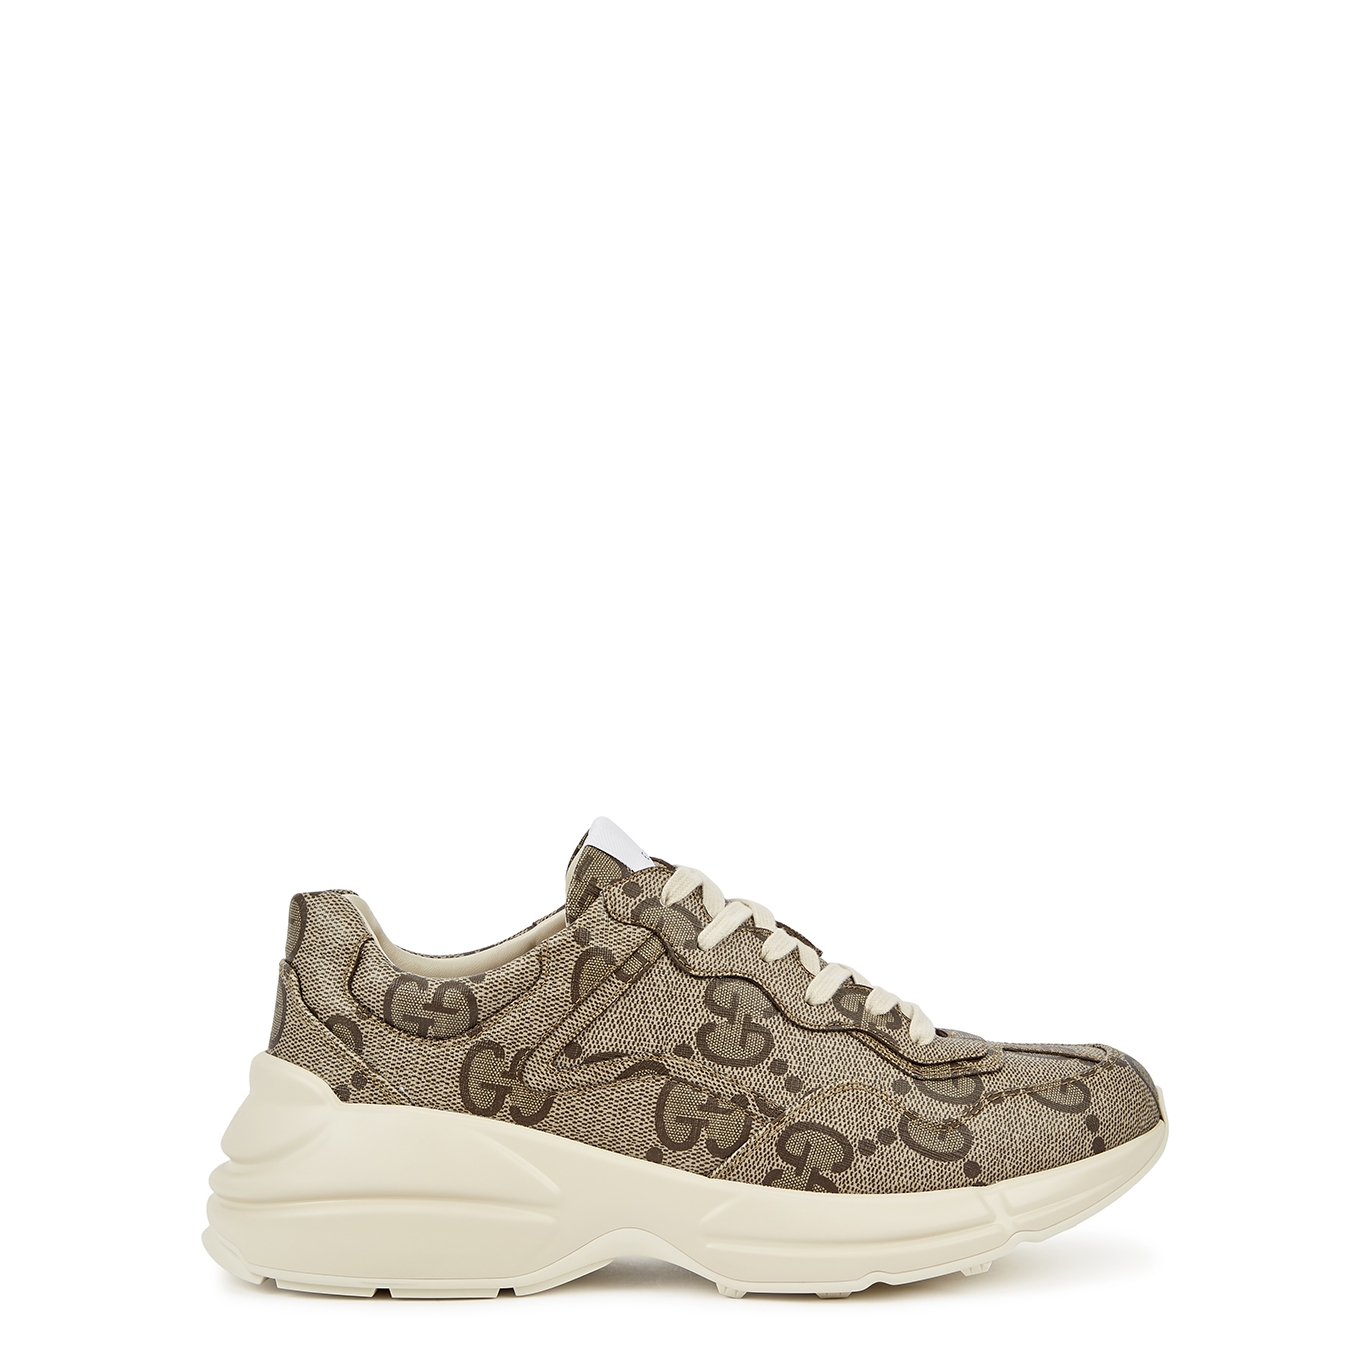 Gucci GG Rhyton Monogrammed Leather Sneakers - Beige - 6